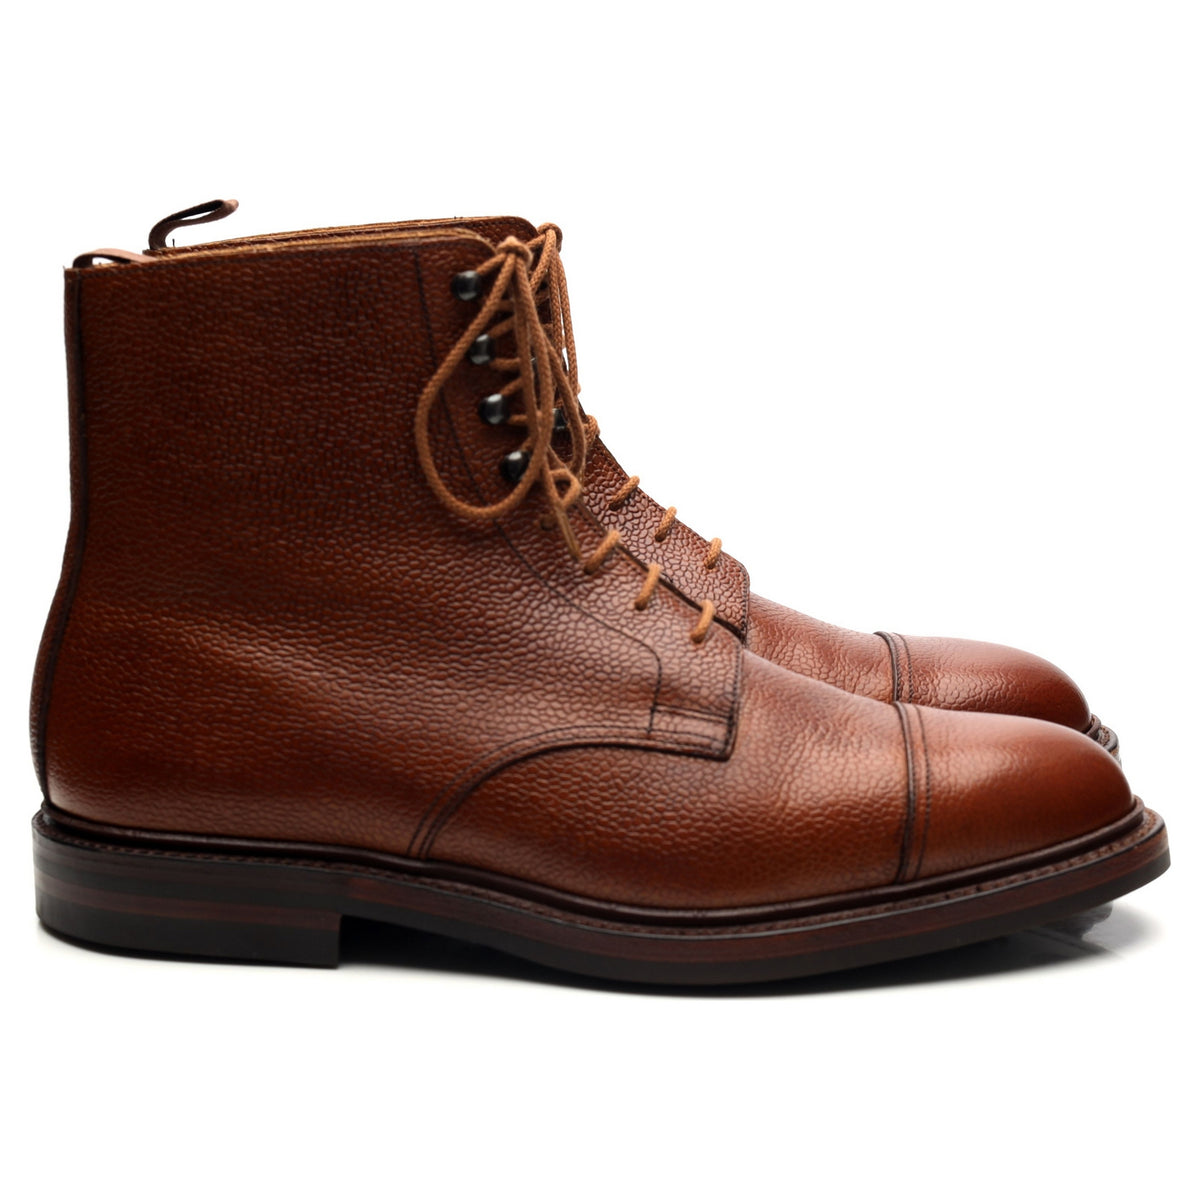 &#39;Coniston&#39; Tan Brown Leather Boots UK 9.5 E